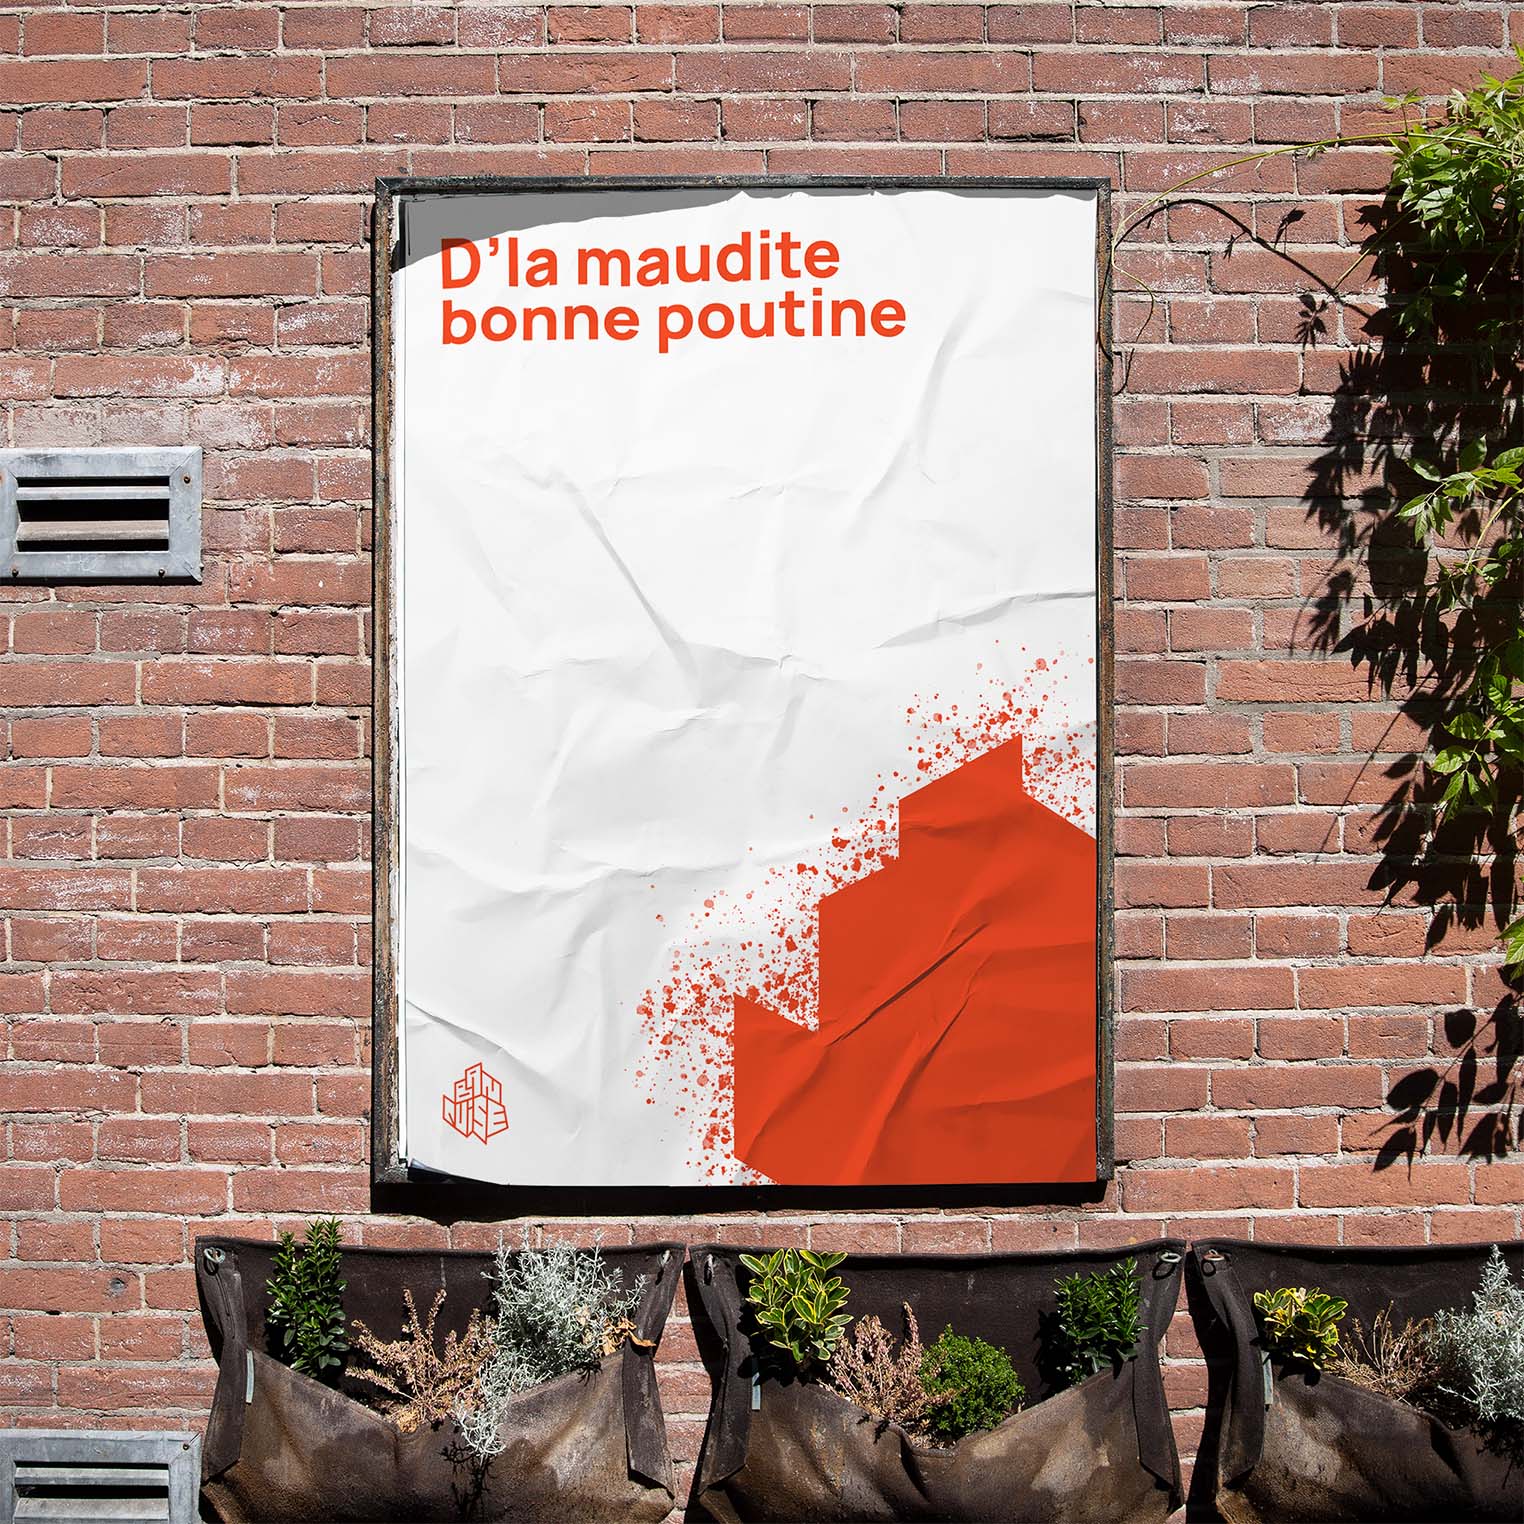 La Banquise redesign mockup on a poster